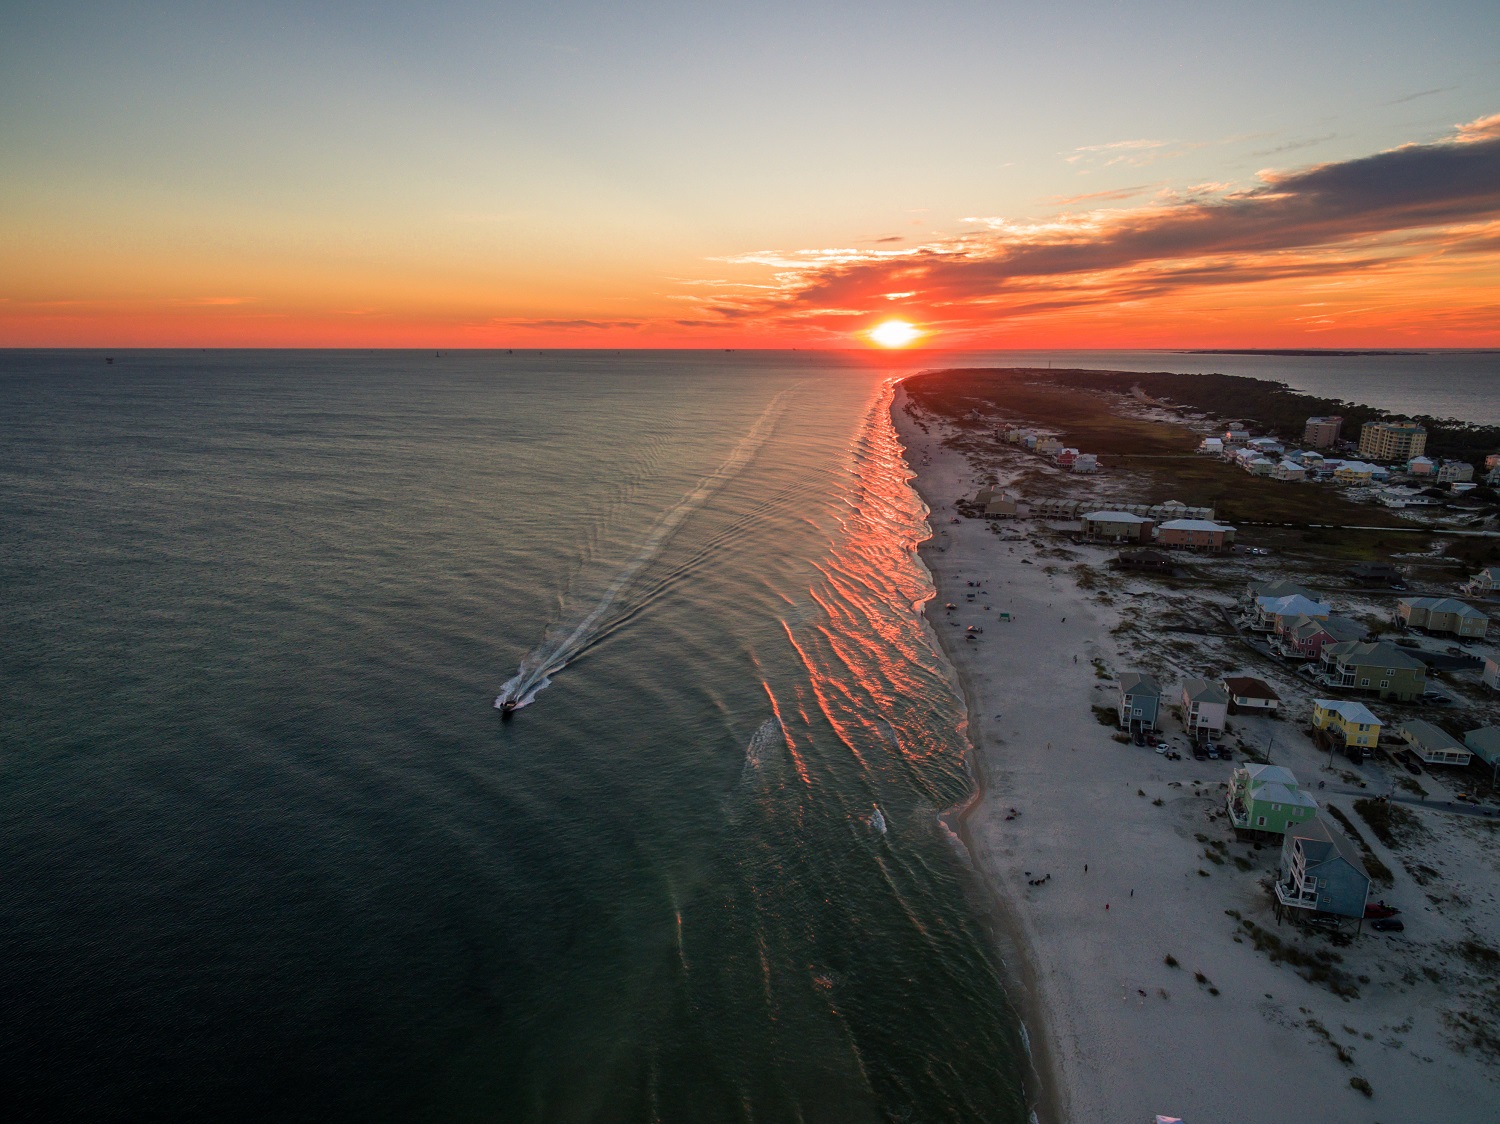 When Is the Best Time to Visit Gulf Shores?